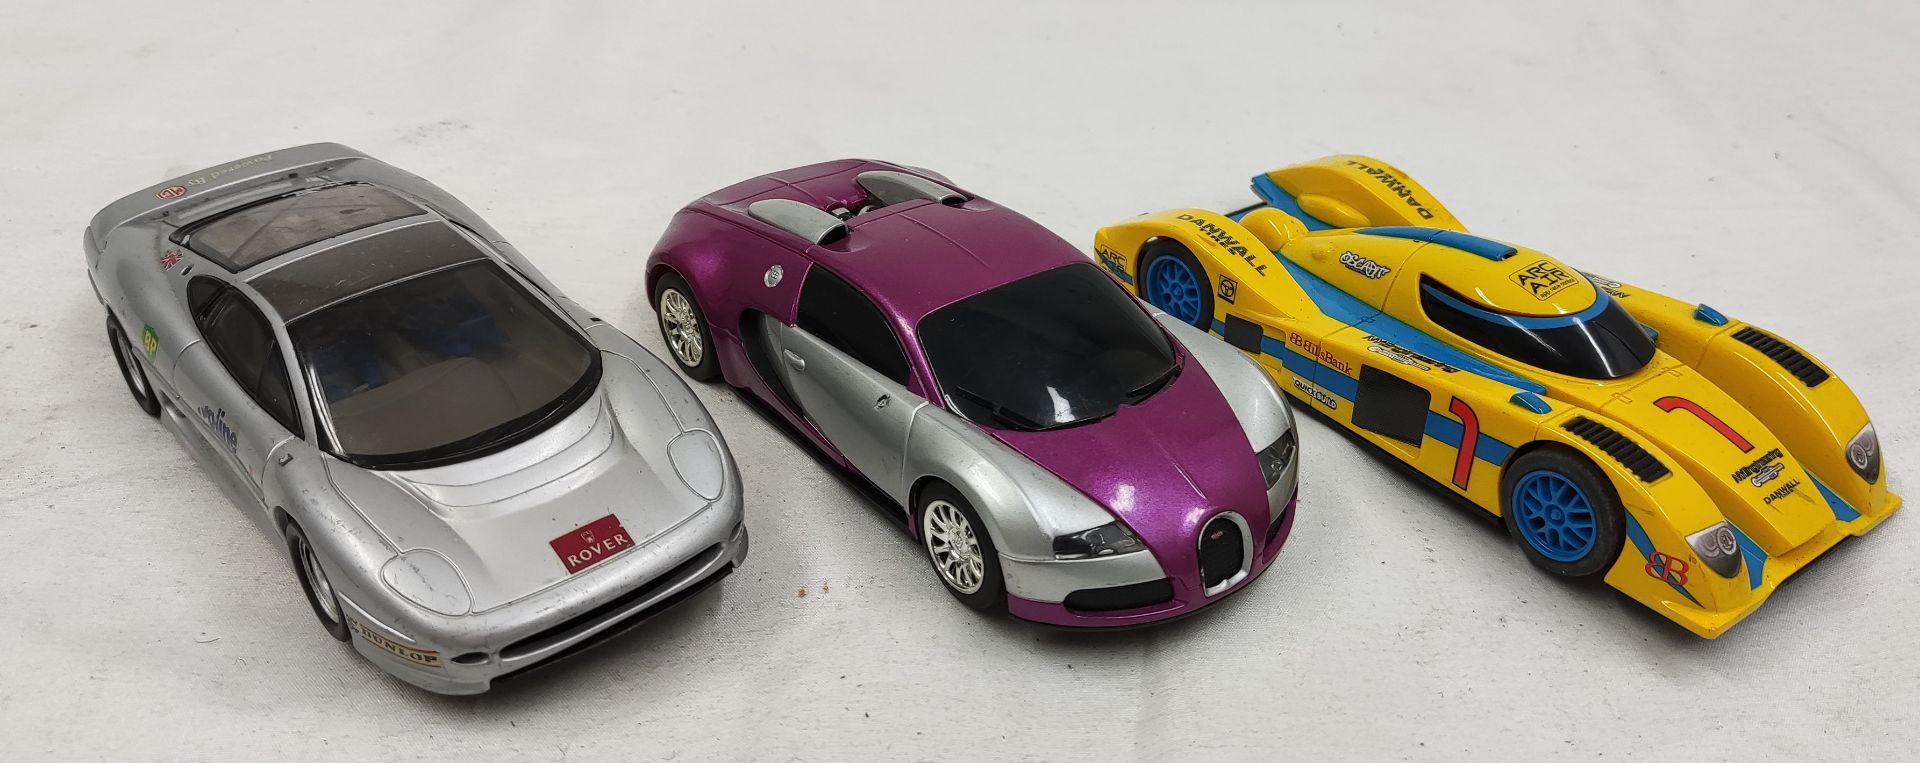 3 x Scalextric Cars - Includes Jaguar XJ220, Bugatti and LM Cars - Tested and Working - Used - CL444